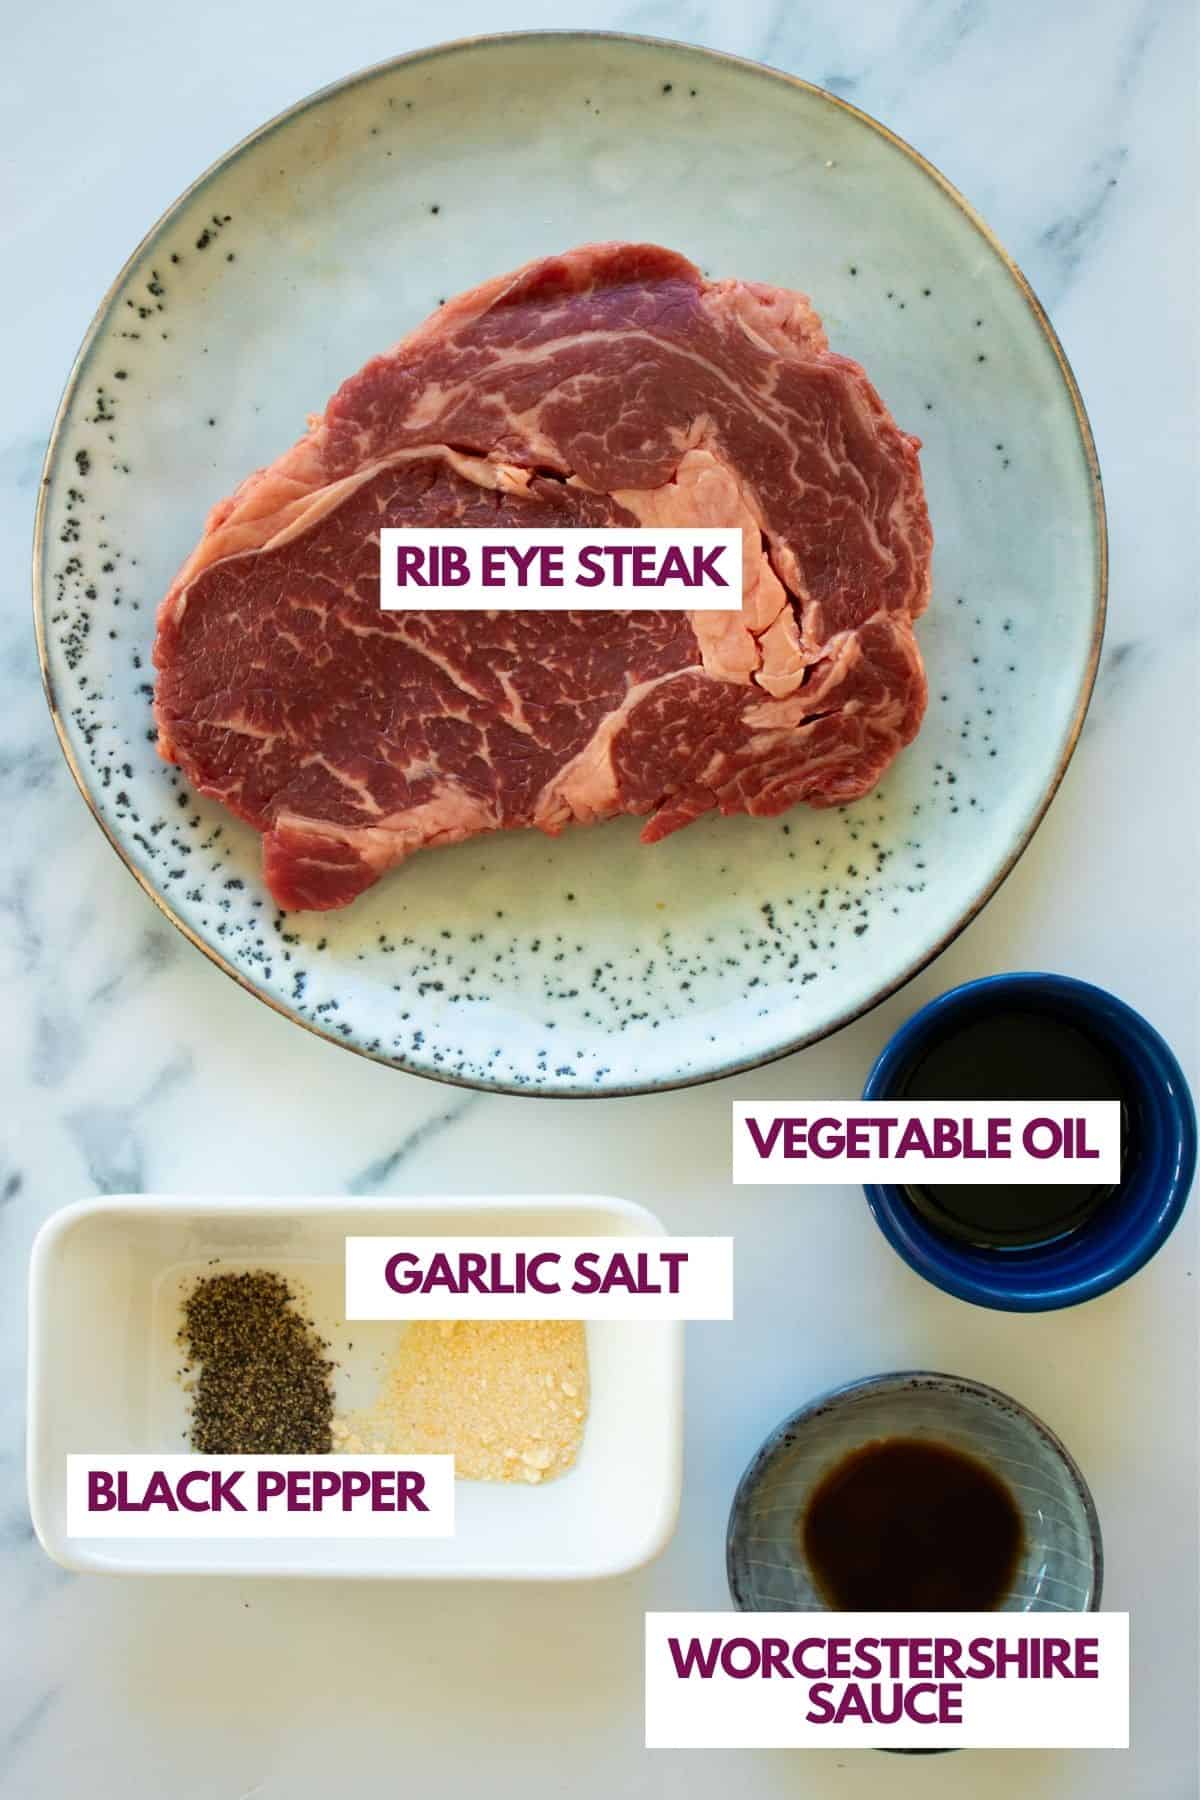 Ingredients to cook a rib eye steak without a cast iron skillet.